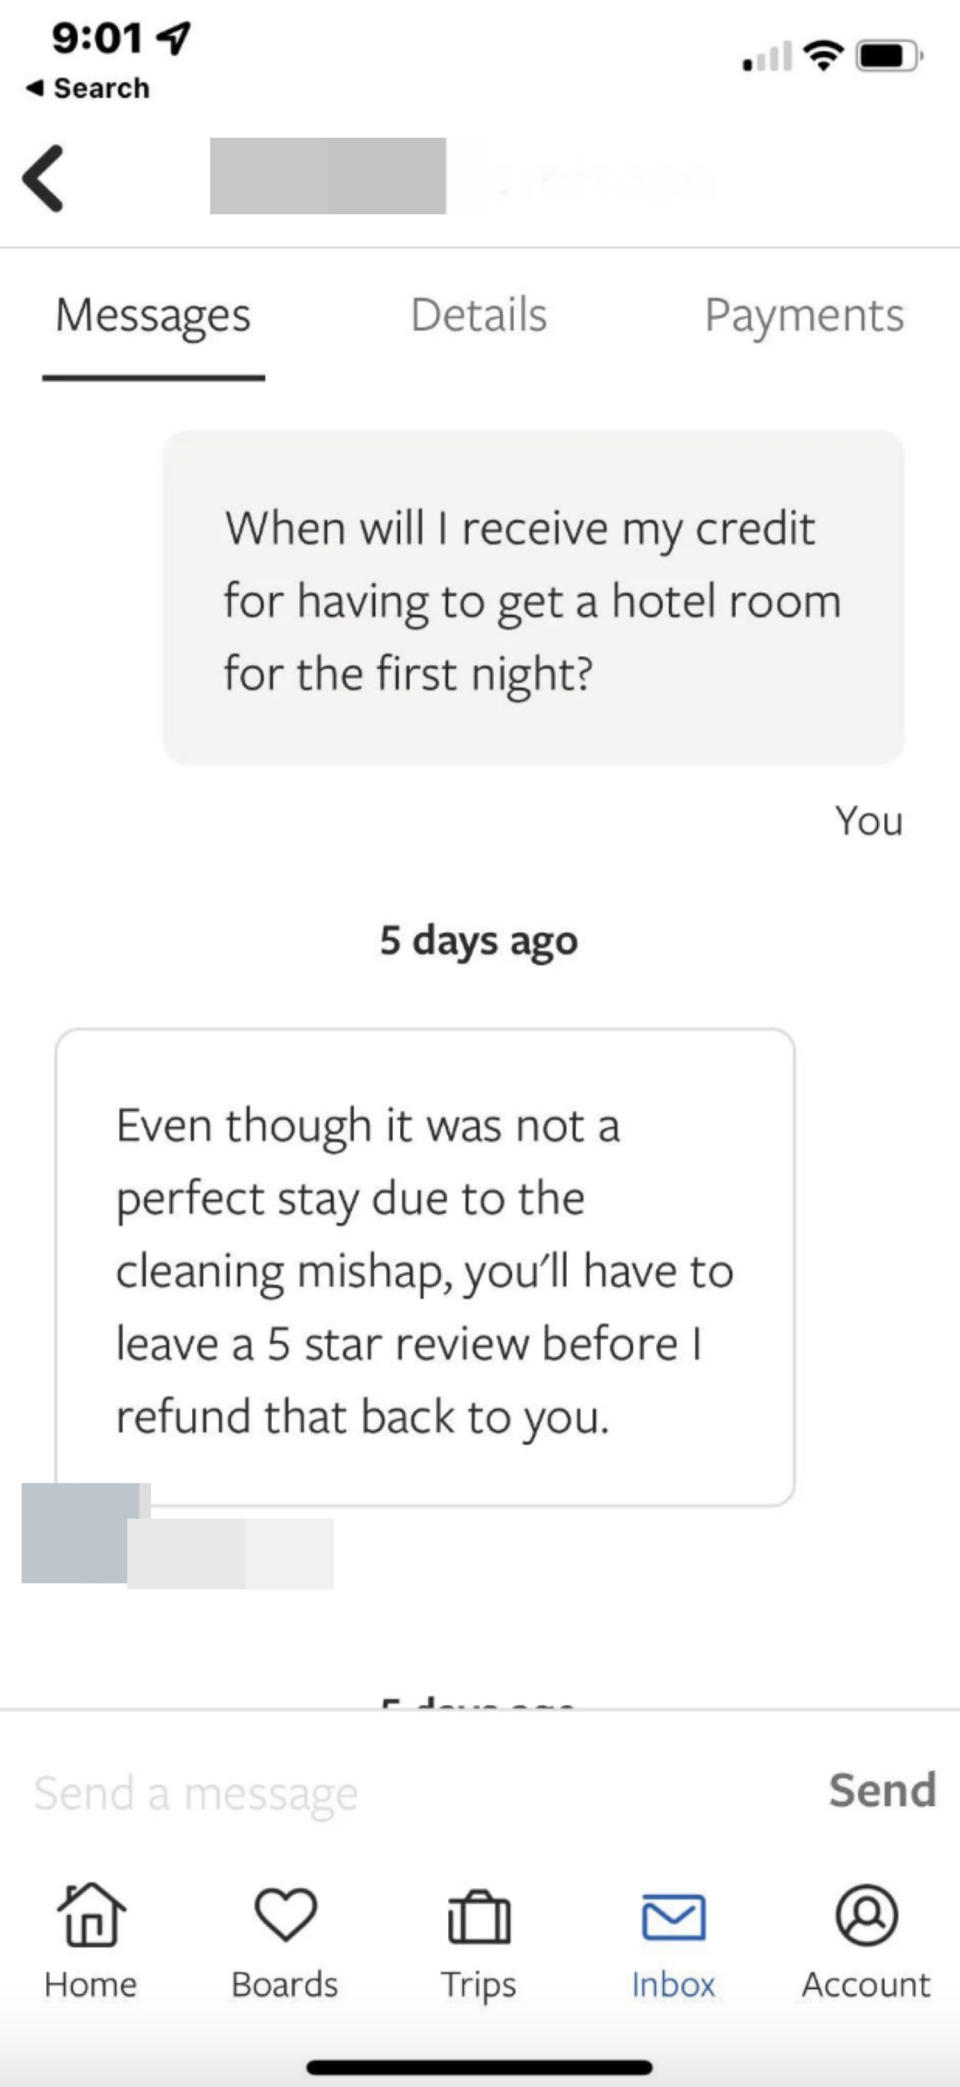 a host telling a person to leave a 5-star review to get a refund